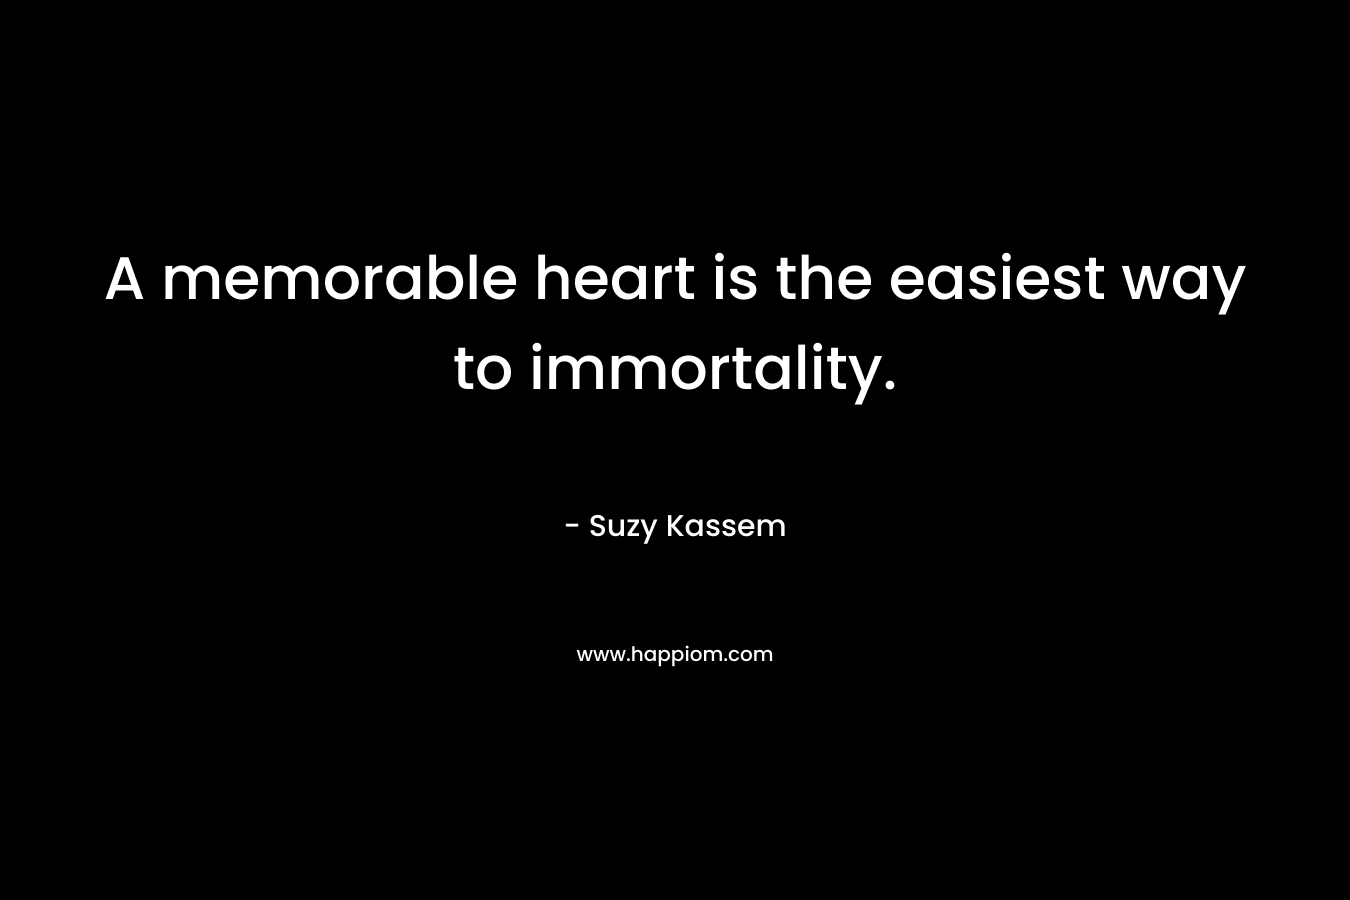 A memorable heart is the easiest way to immortality.